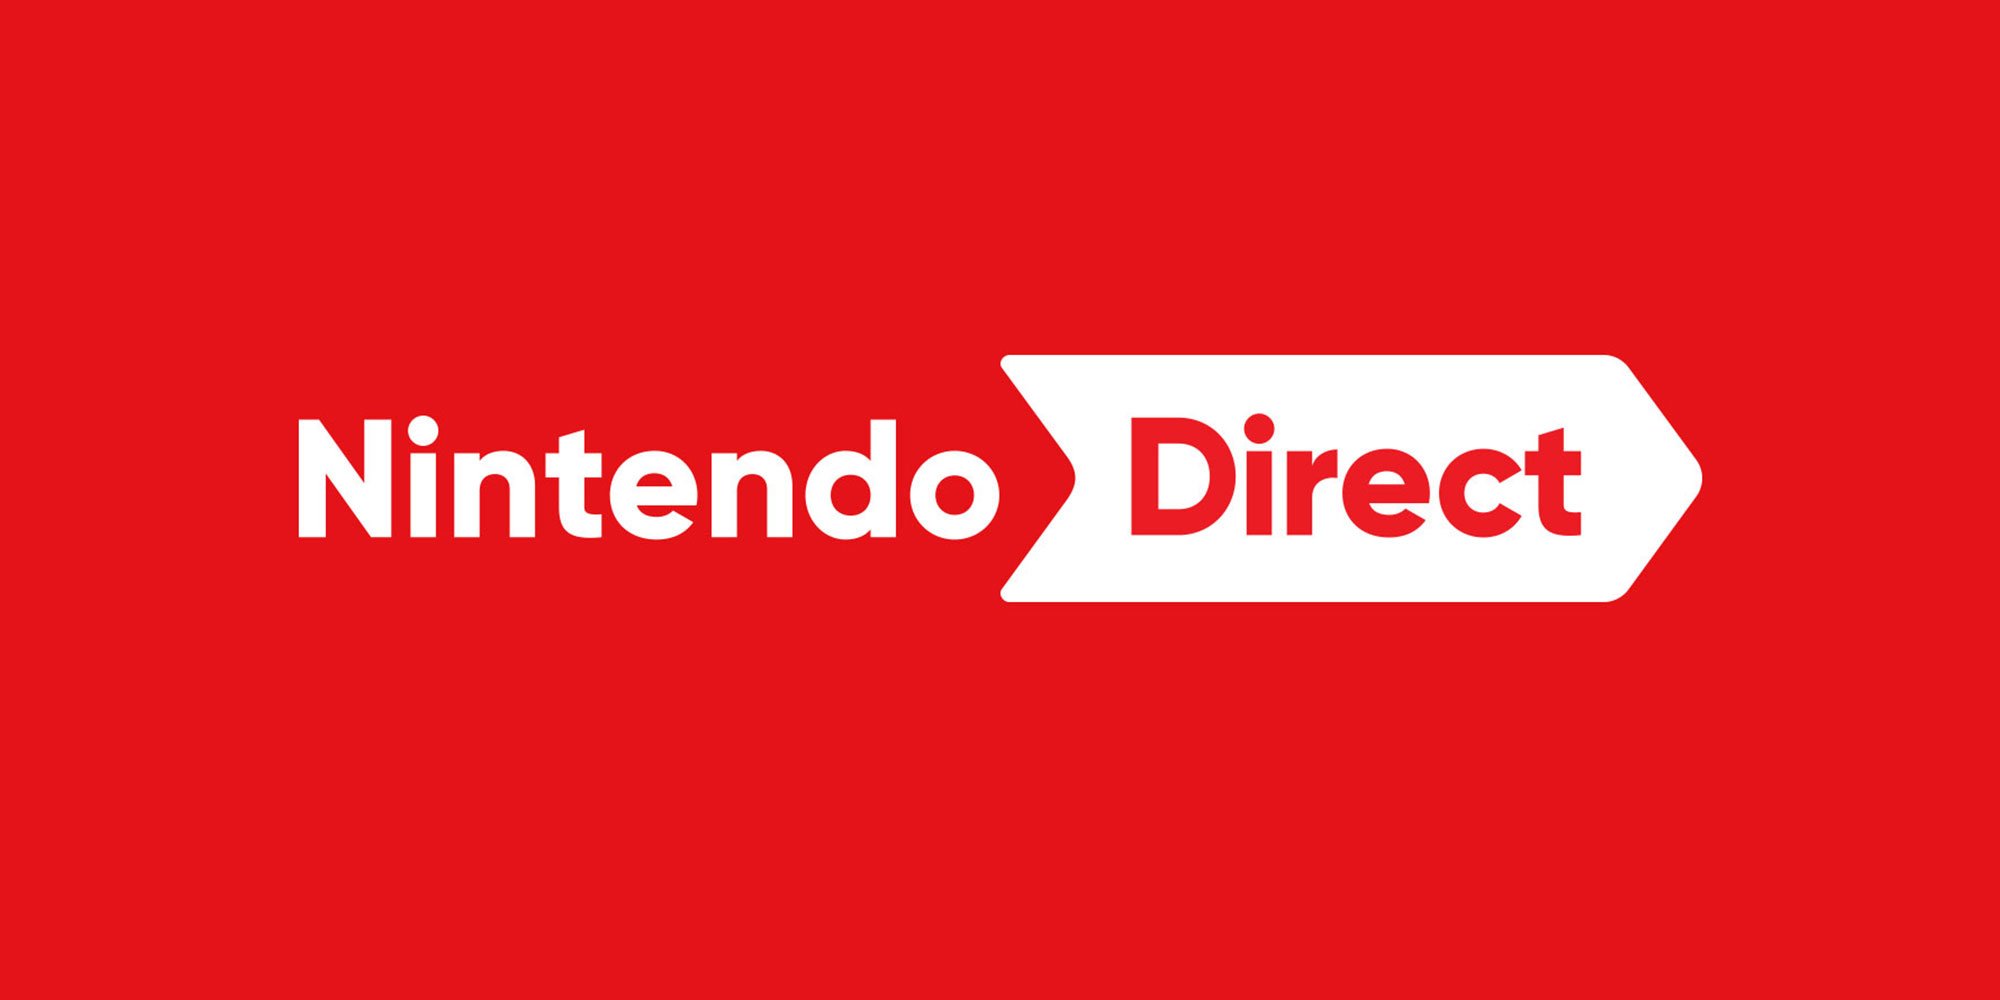 Windwaker and Twilight Princess Switch reportedly due for reveal in new  Nintendo Direct